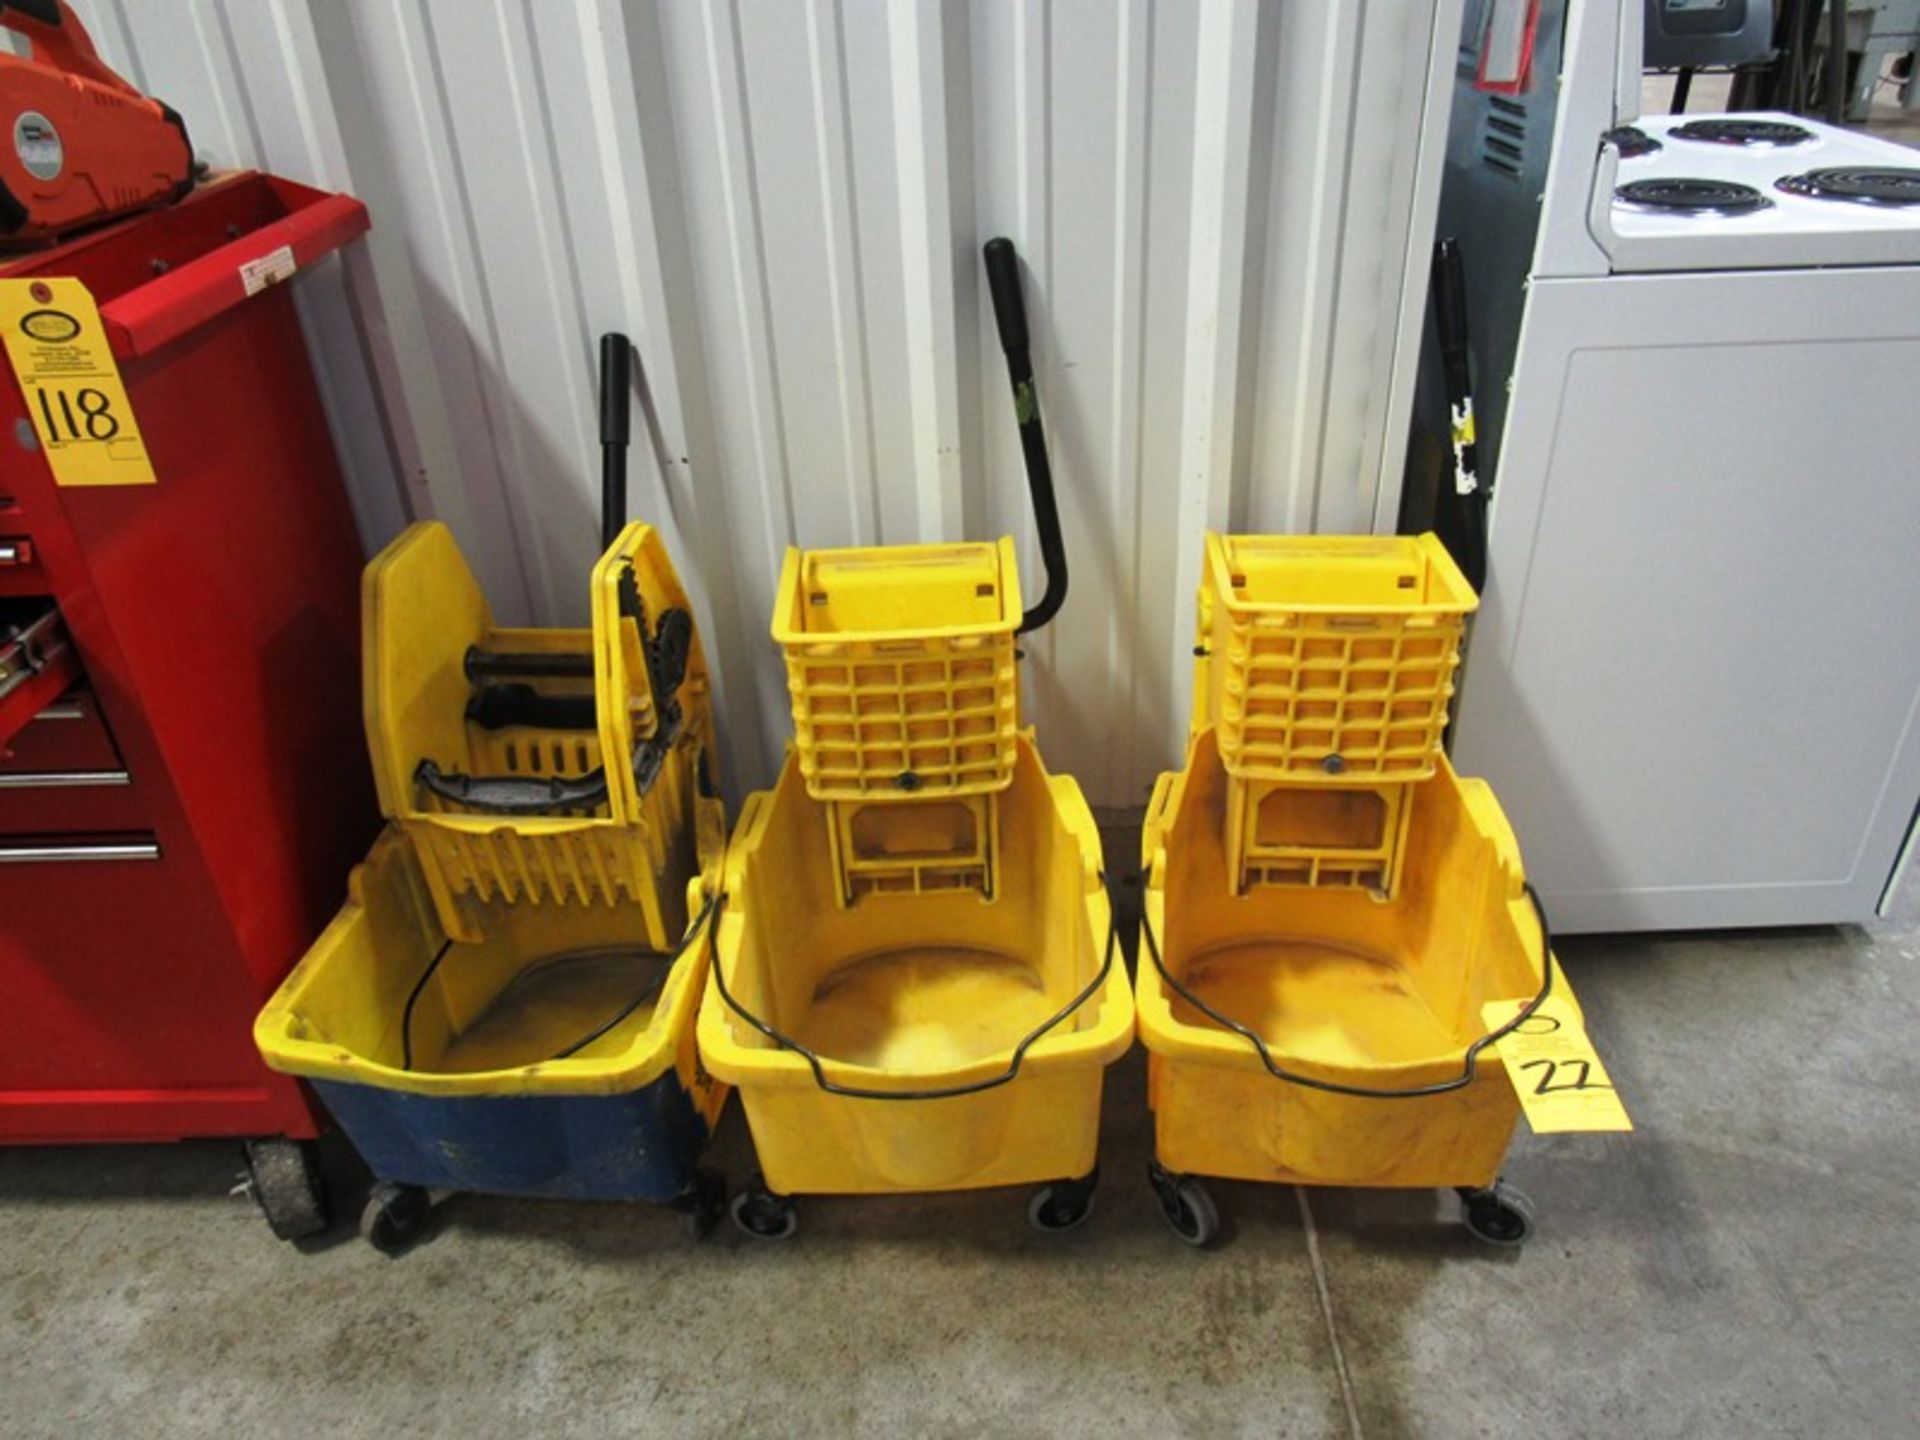 Mop Buckets (Removal Begins July 5th) Loading Fee $35 Rigger: Norm Pavlish (402) 540-8843